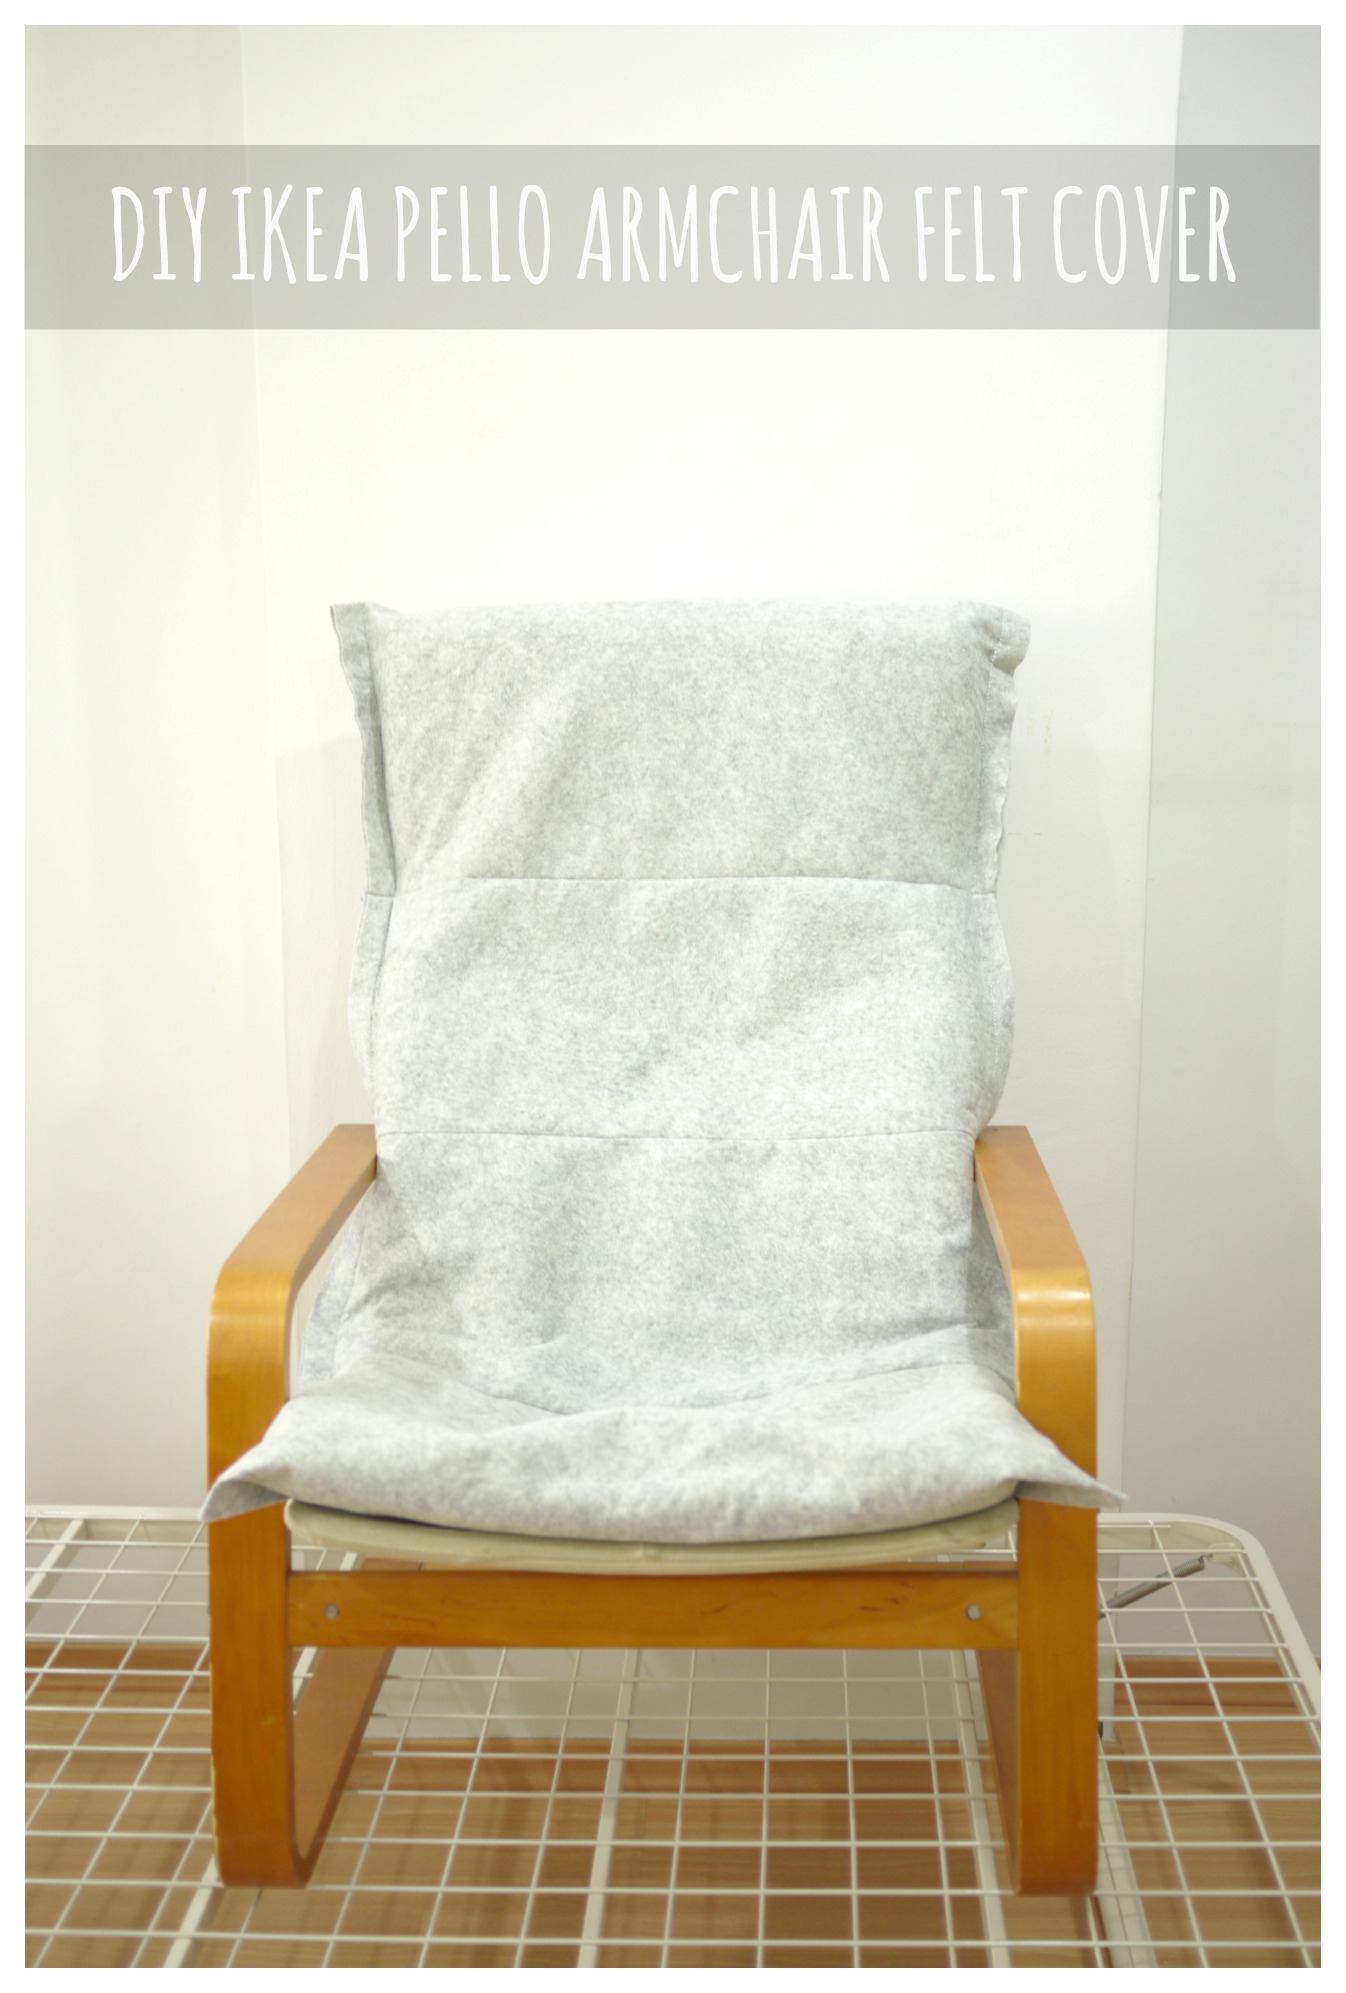 DIY Chair Arm Covers  Diy chair covers, Arm chair covers, Diy chair